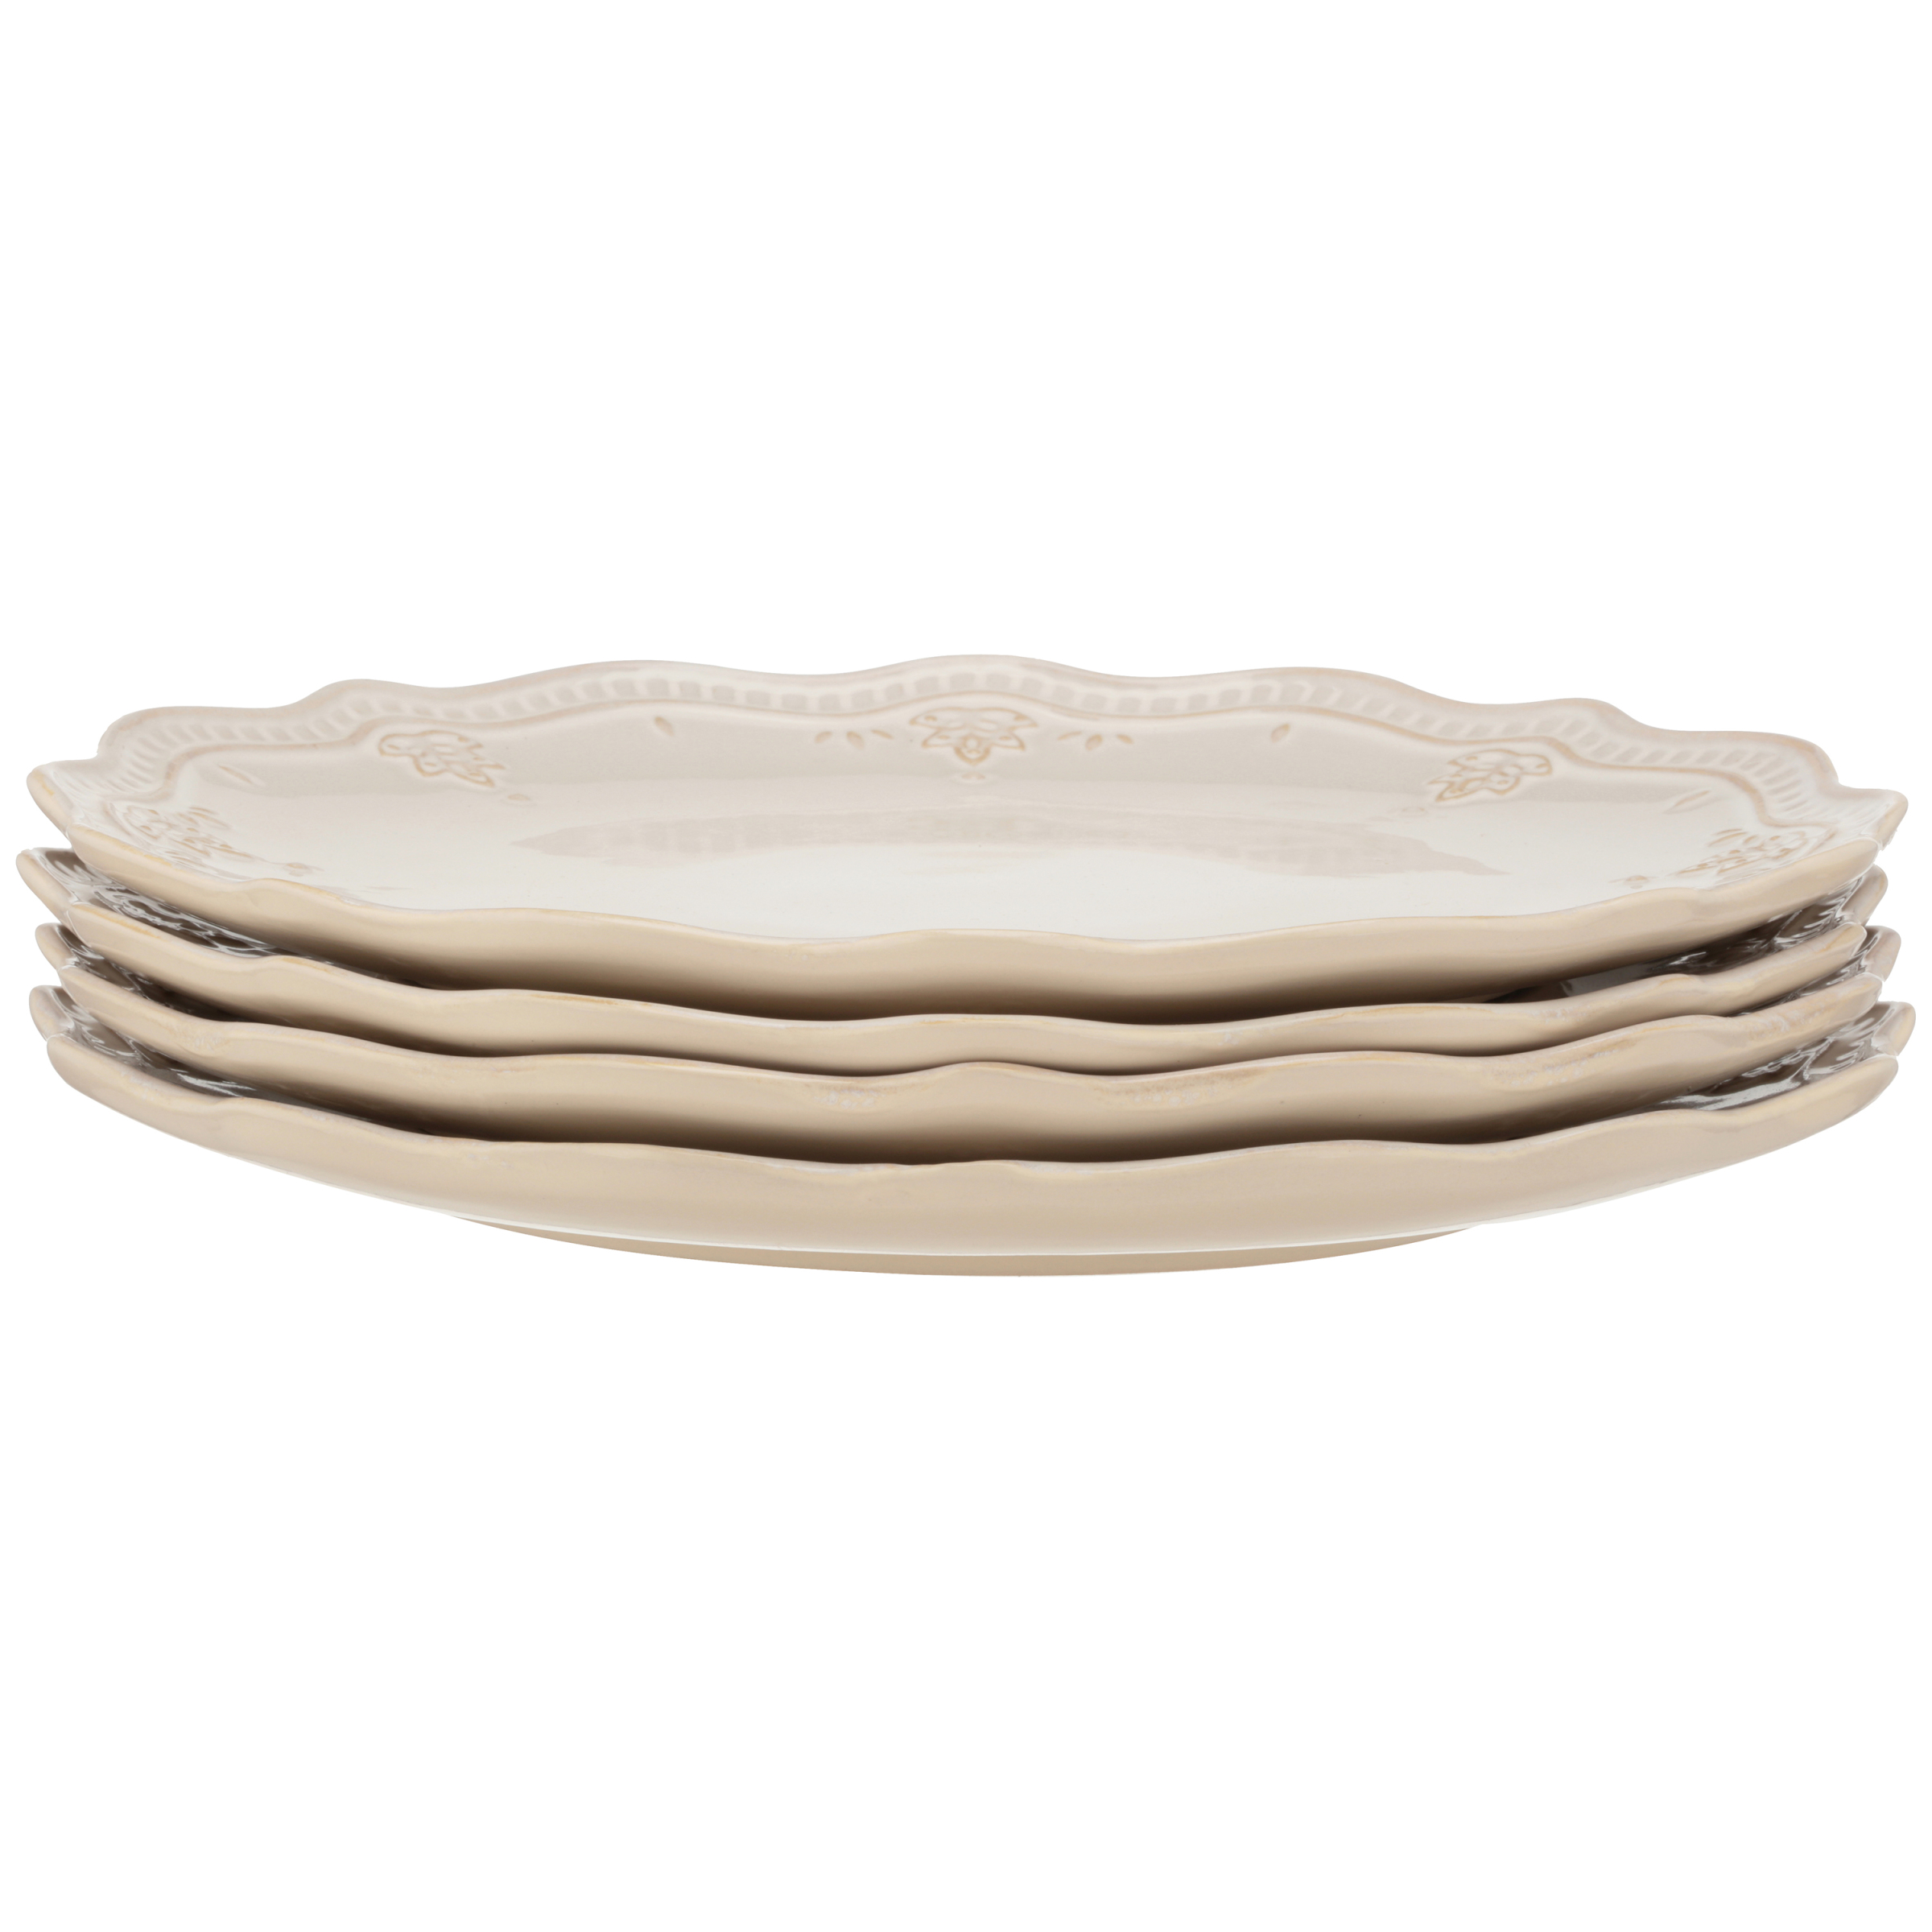 The Pioneer Woman Farmhouse Lace 4-Piece Dinner Plate Set - image 2 of 4